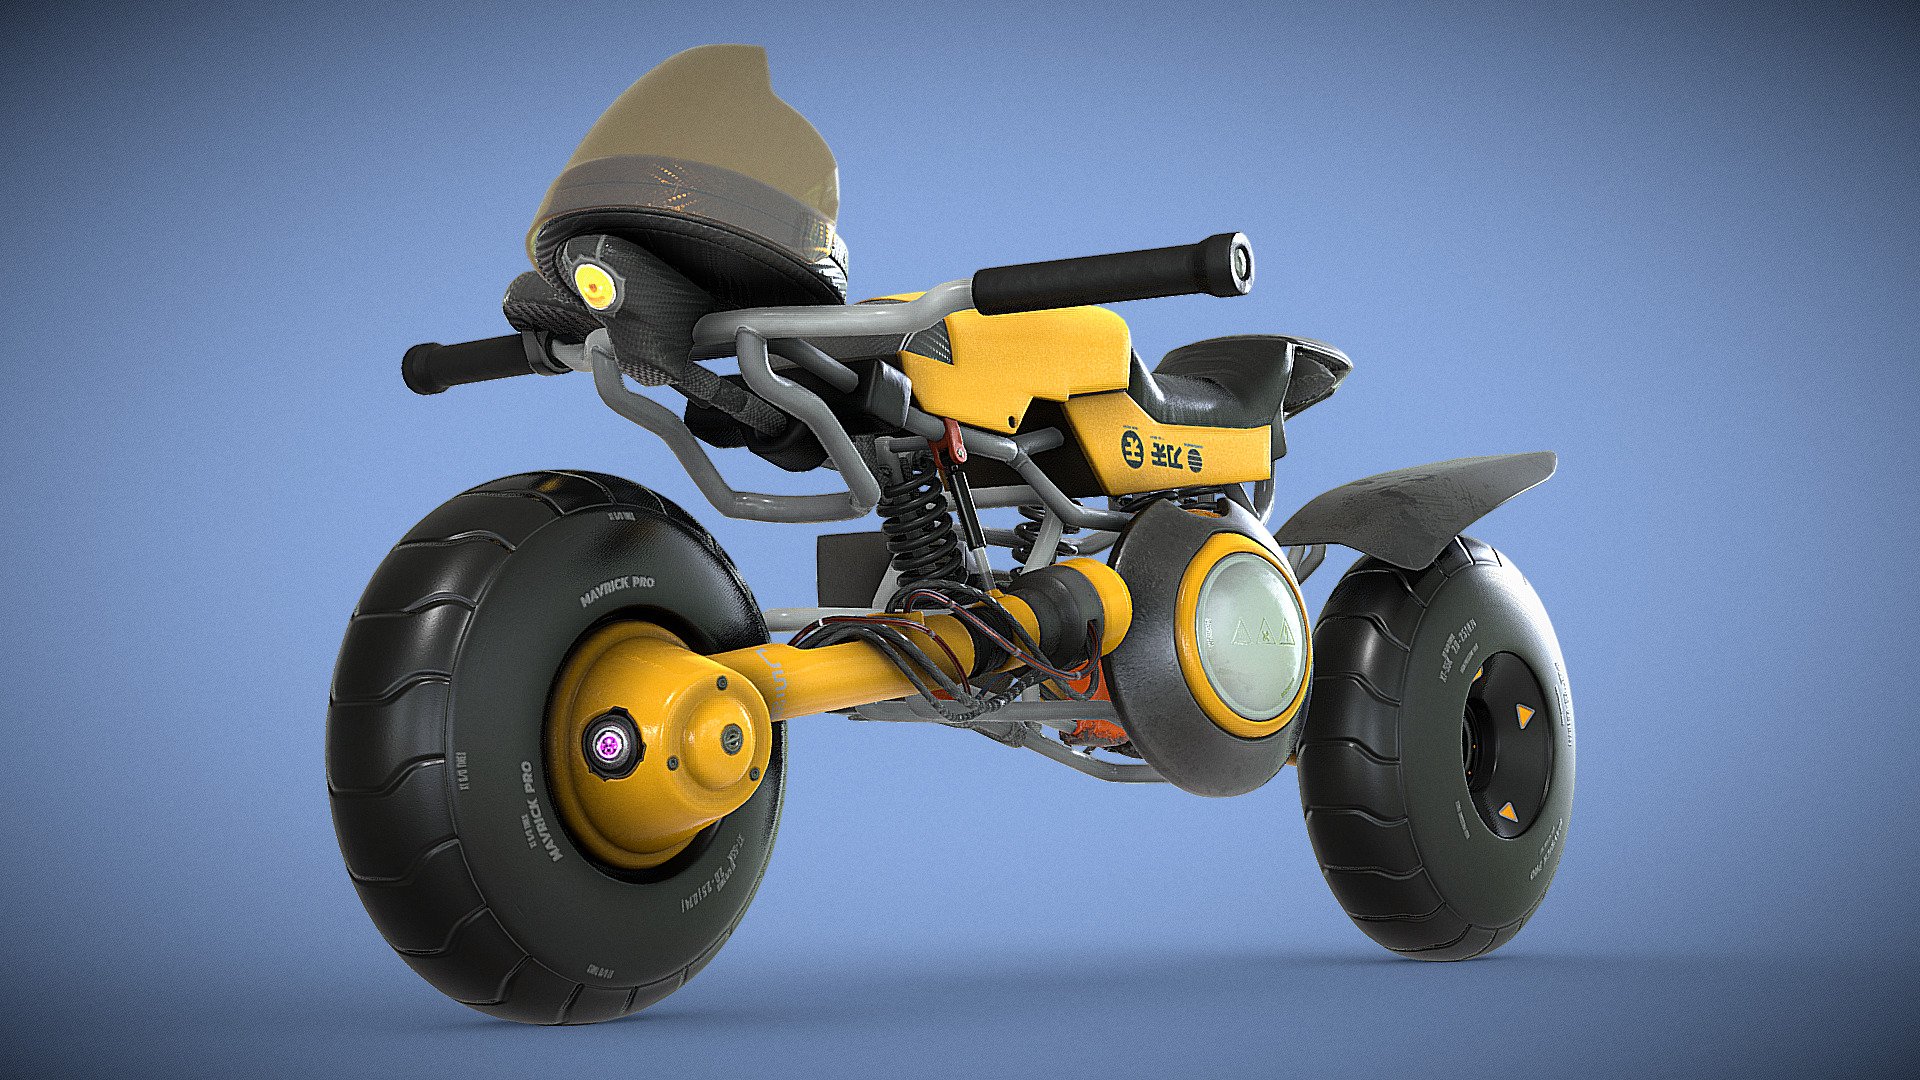 Sci-fi electric motor bike 
original concept
2 x 4K PBR Materials 

INCLUDED A NATIVE BLENDER FILE THAT COMES WITH A VEHICLE RIG
For the wheels and suspension and steering - Sci-fi electric bike - Buy Royalty Free 3D model by neatpolygons 3d model